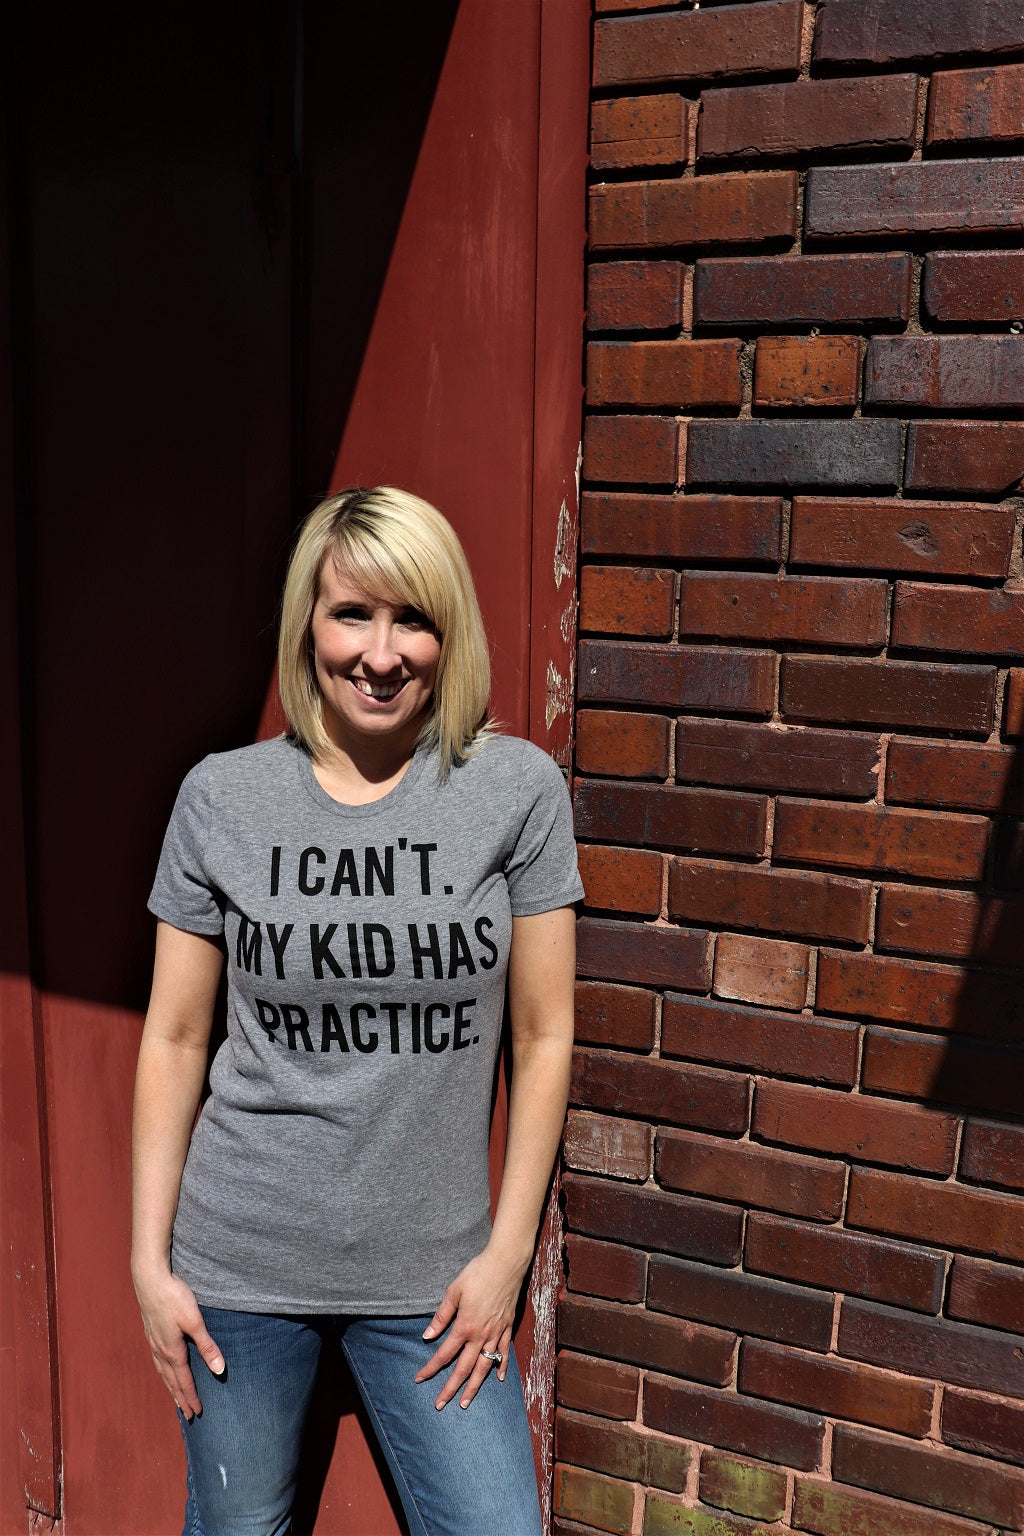 I Can't My Kid Has Practice - KC Shirts